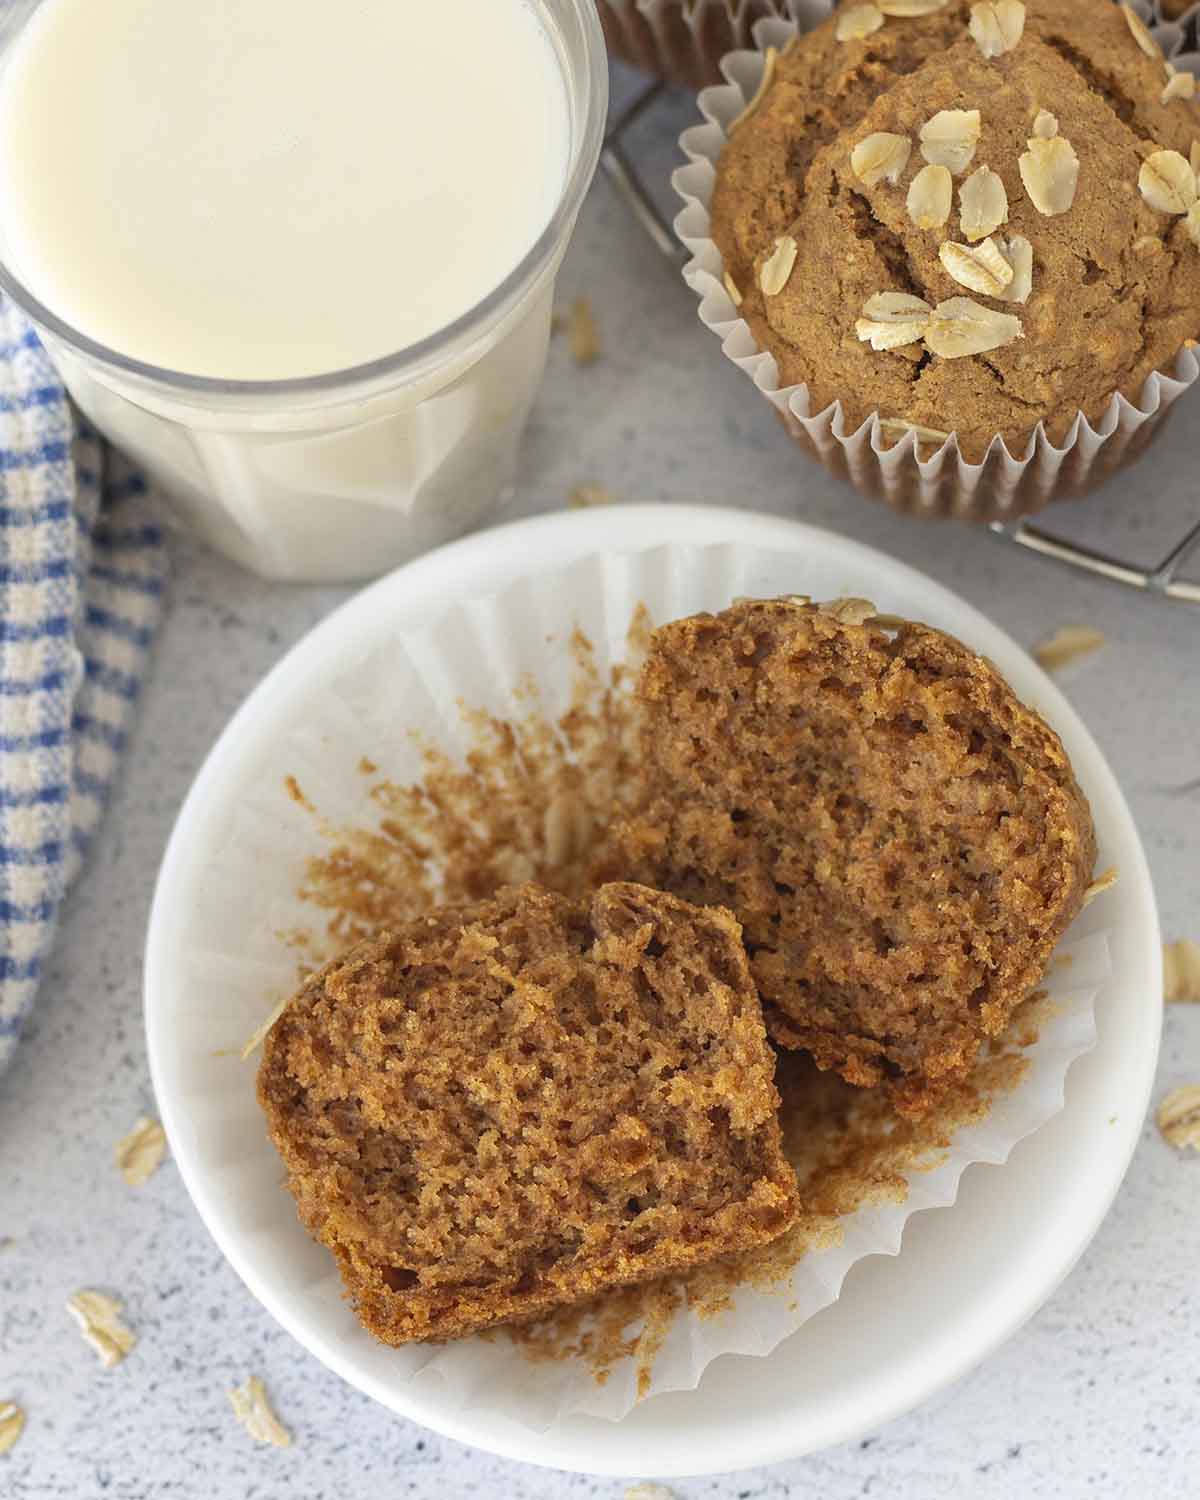 Image shows and overhead shot of an oatmeal muffin that has been split in half to show the inner fluffy texture.